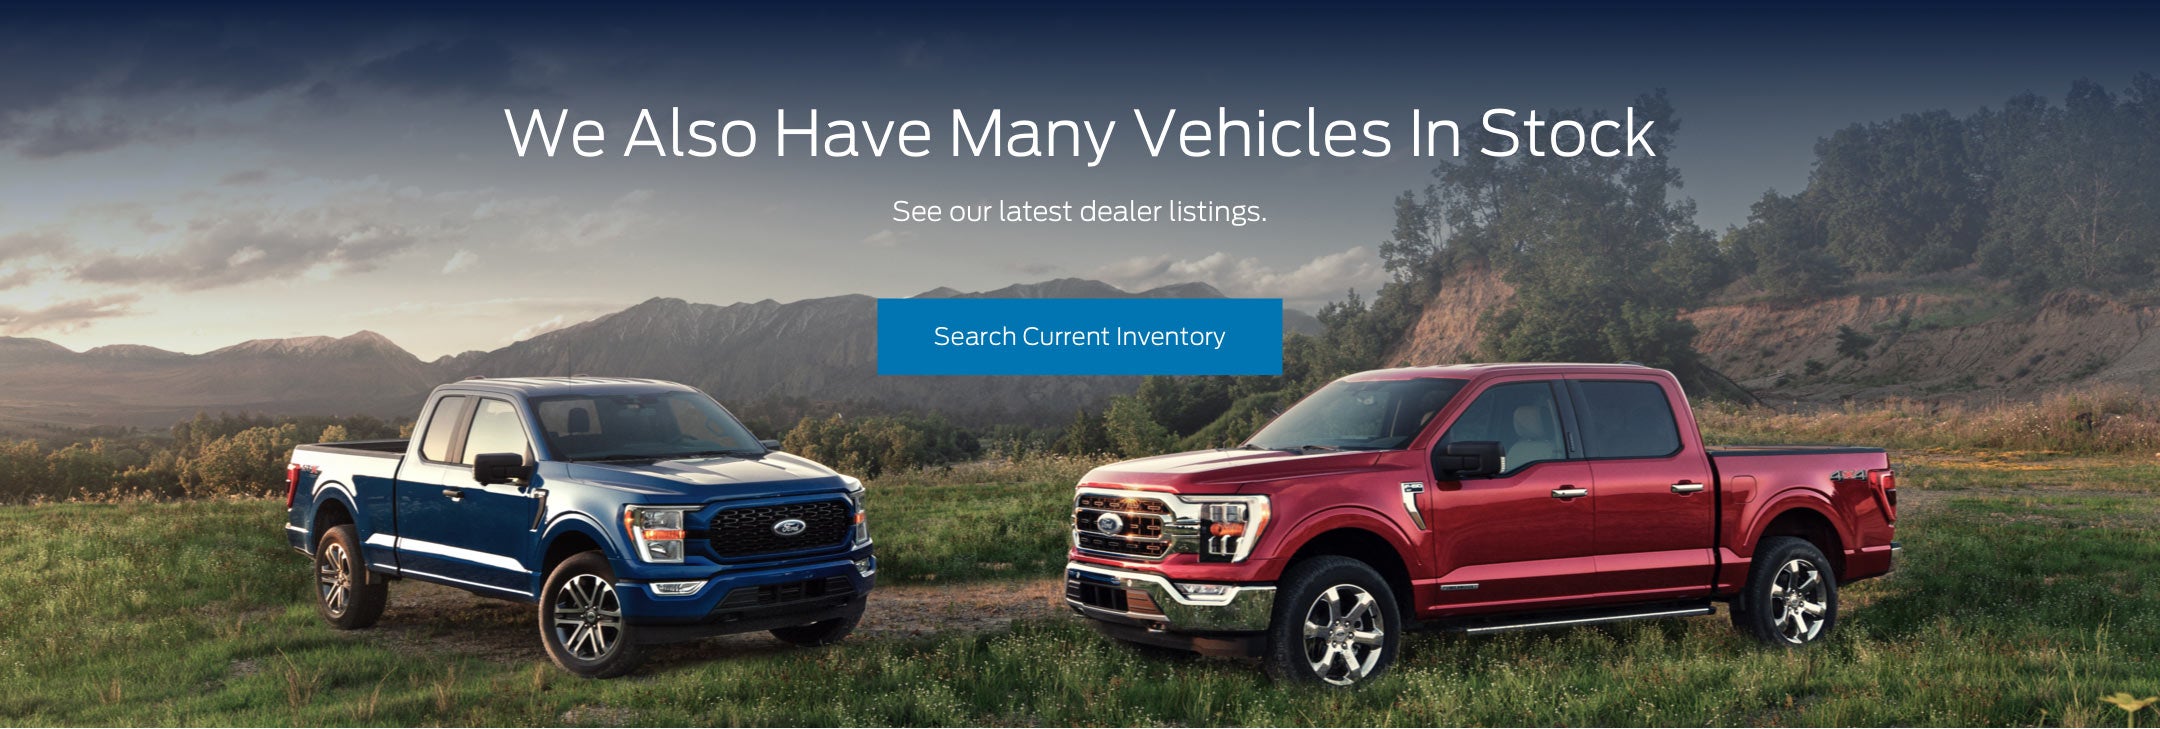 Ford vehicles in stock | Preferred Ford of Grand Haven in Grand Haven MI